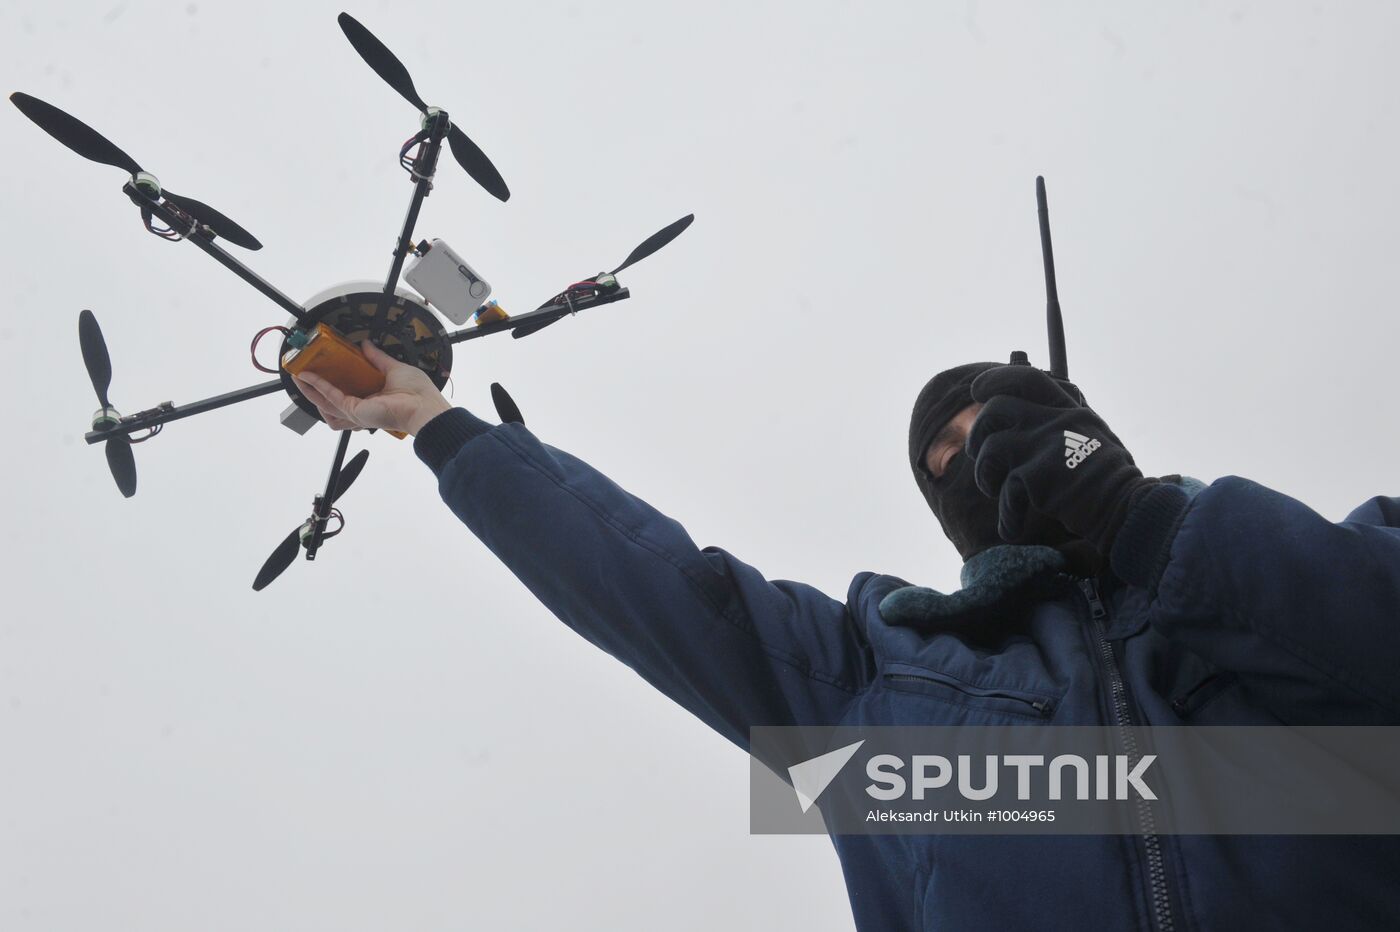 Presentation of new "Shesticopter" drones